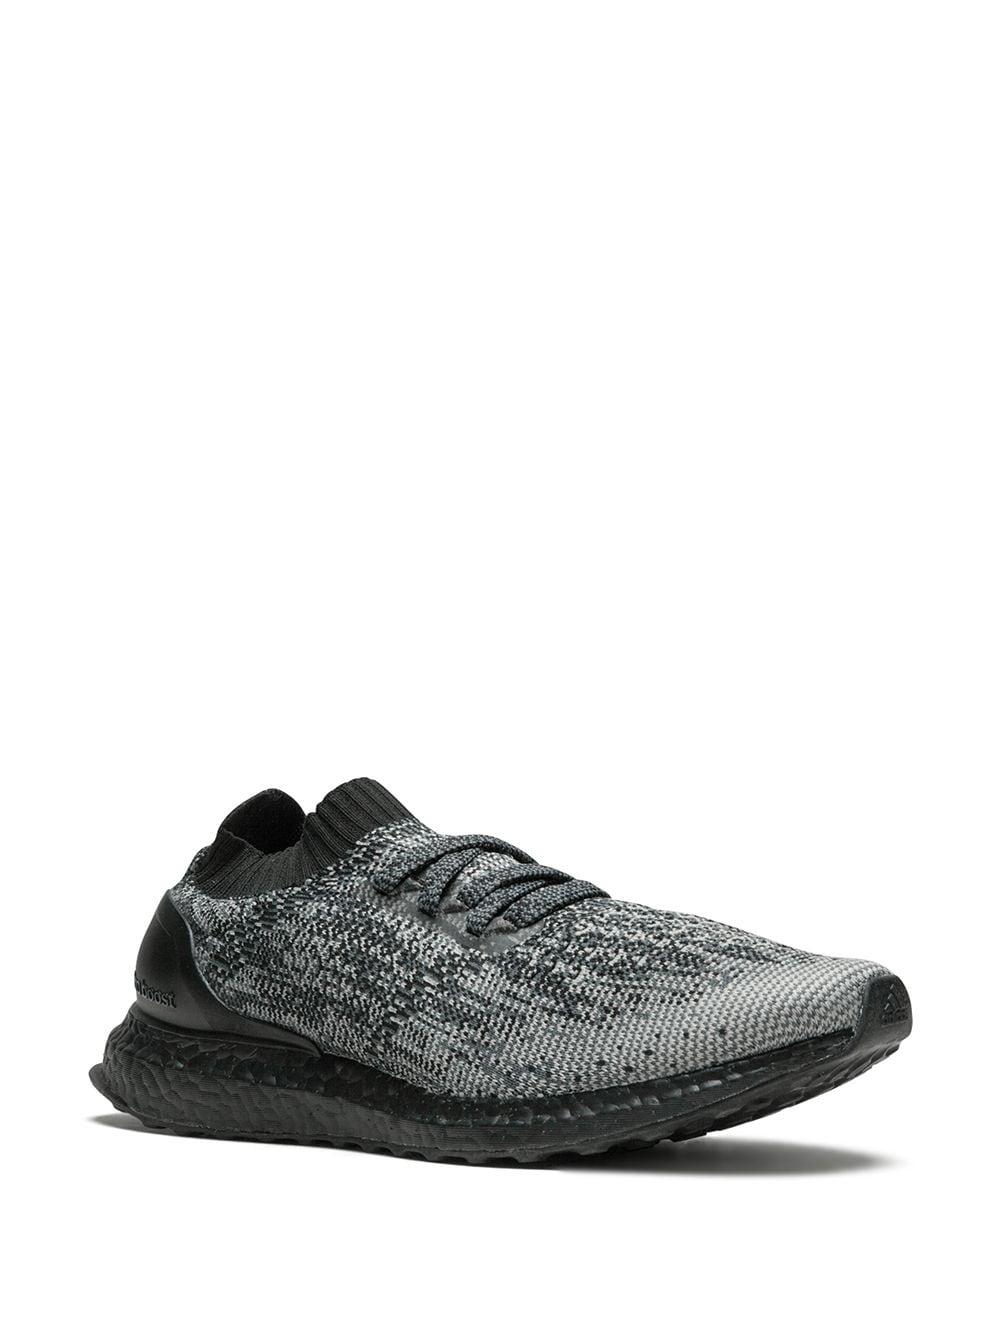 ultra boost uncaged ltd shoes